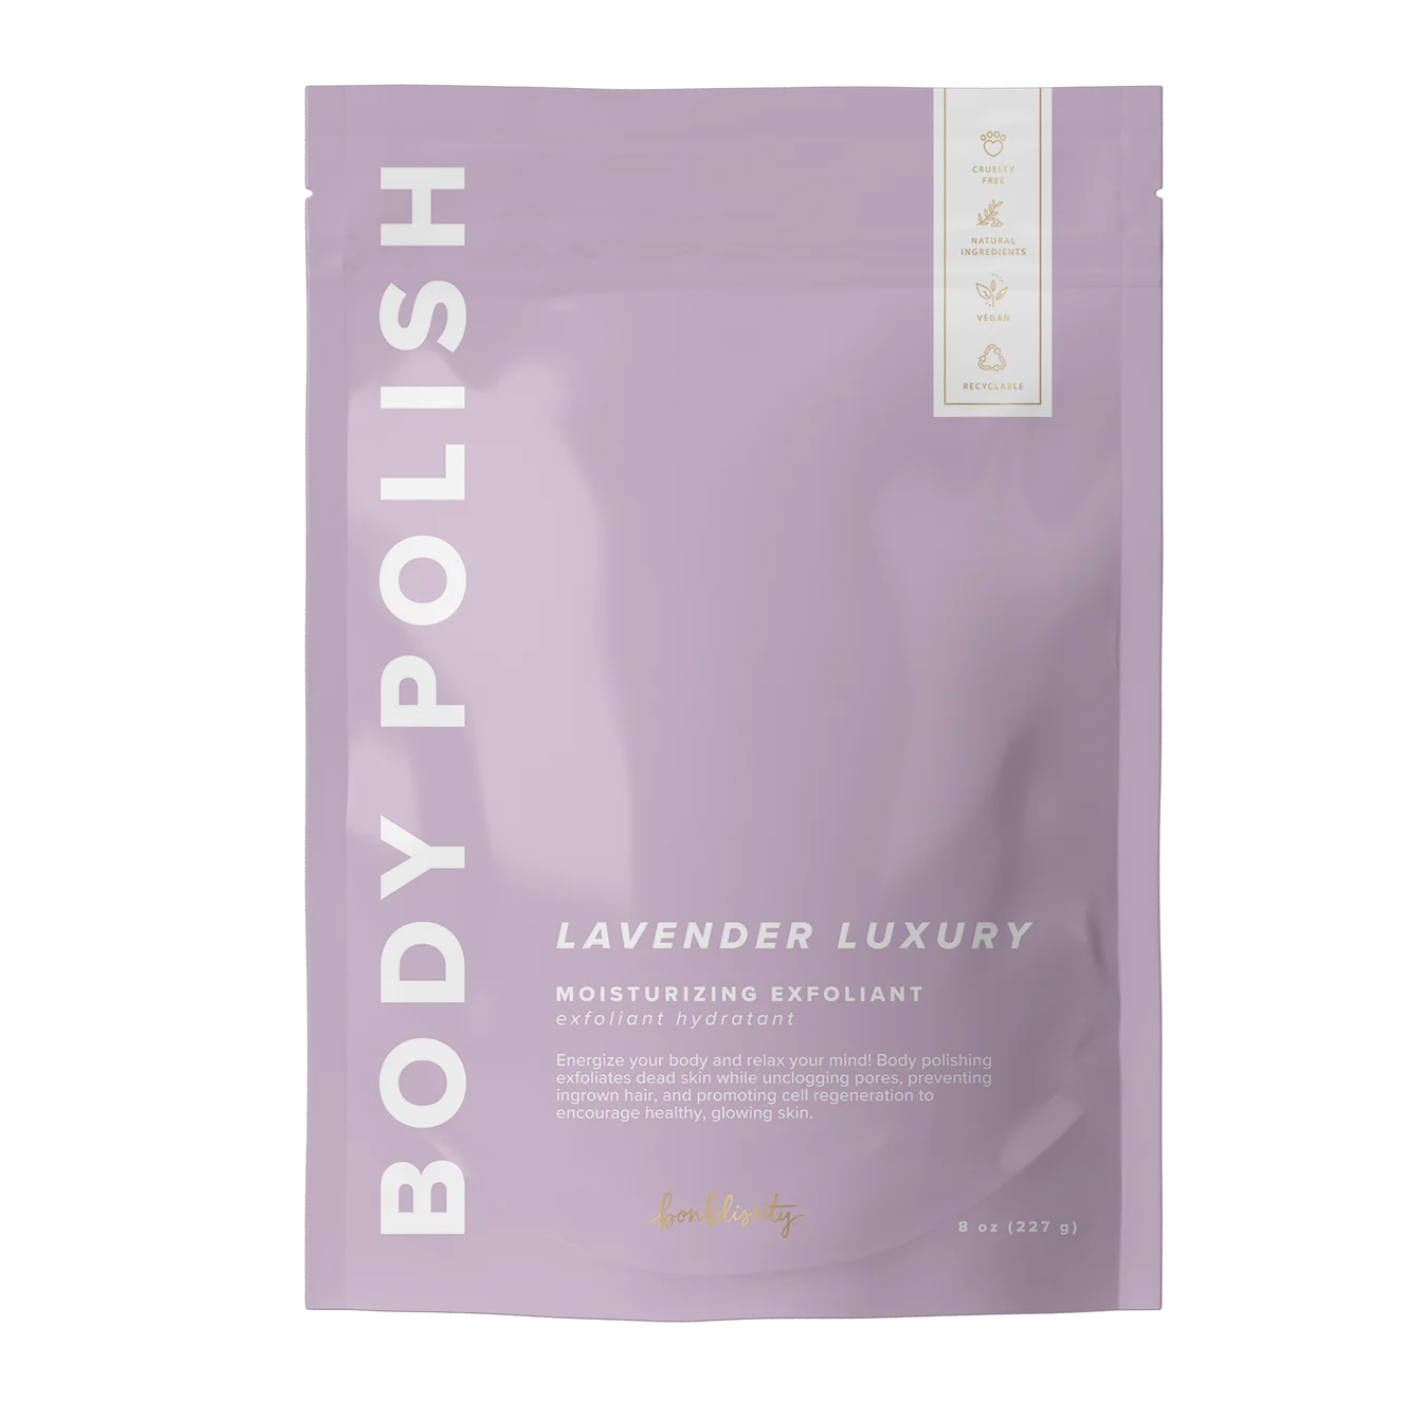 Bag of Lavender Body Polish that reads: Lavender Luxury Moisturizing Exfloiant: Energize you body and relax your mind! Body polishing exfoliates dead skin while unclogging pores, preventing ingrown hair, and promoting cell regeneration to encourage healthy, glowing skin. The bag is a light purple color.